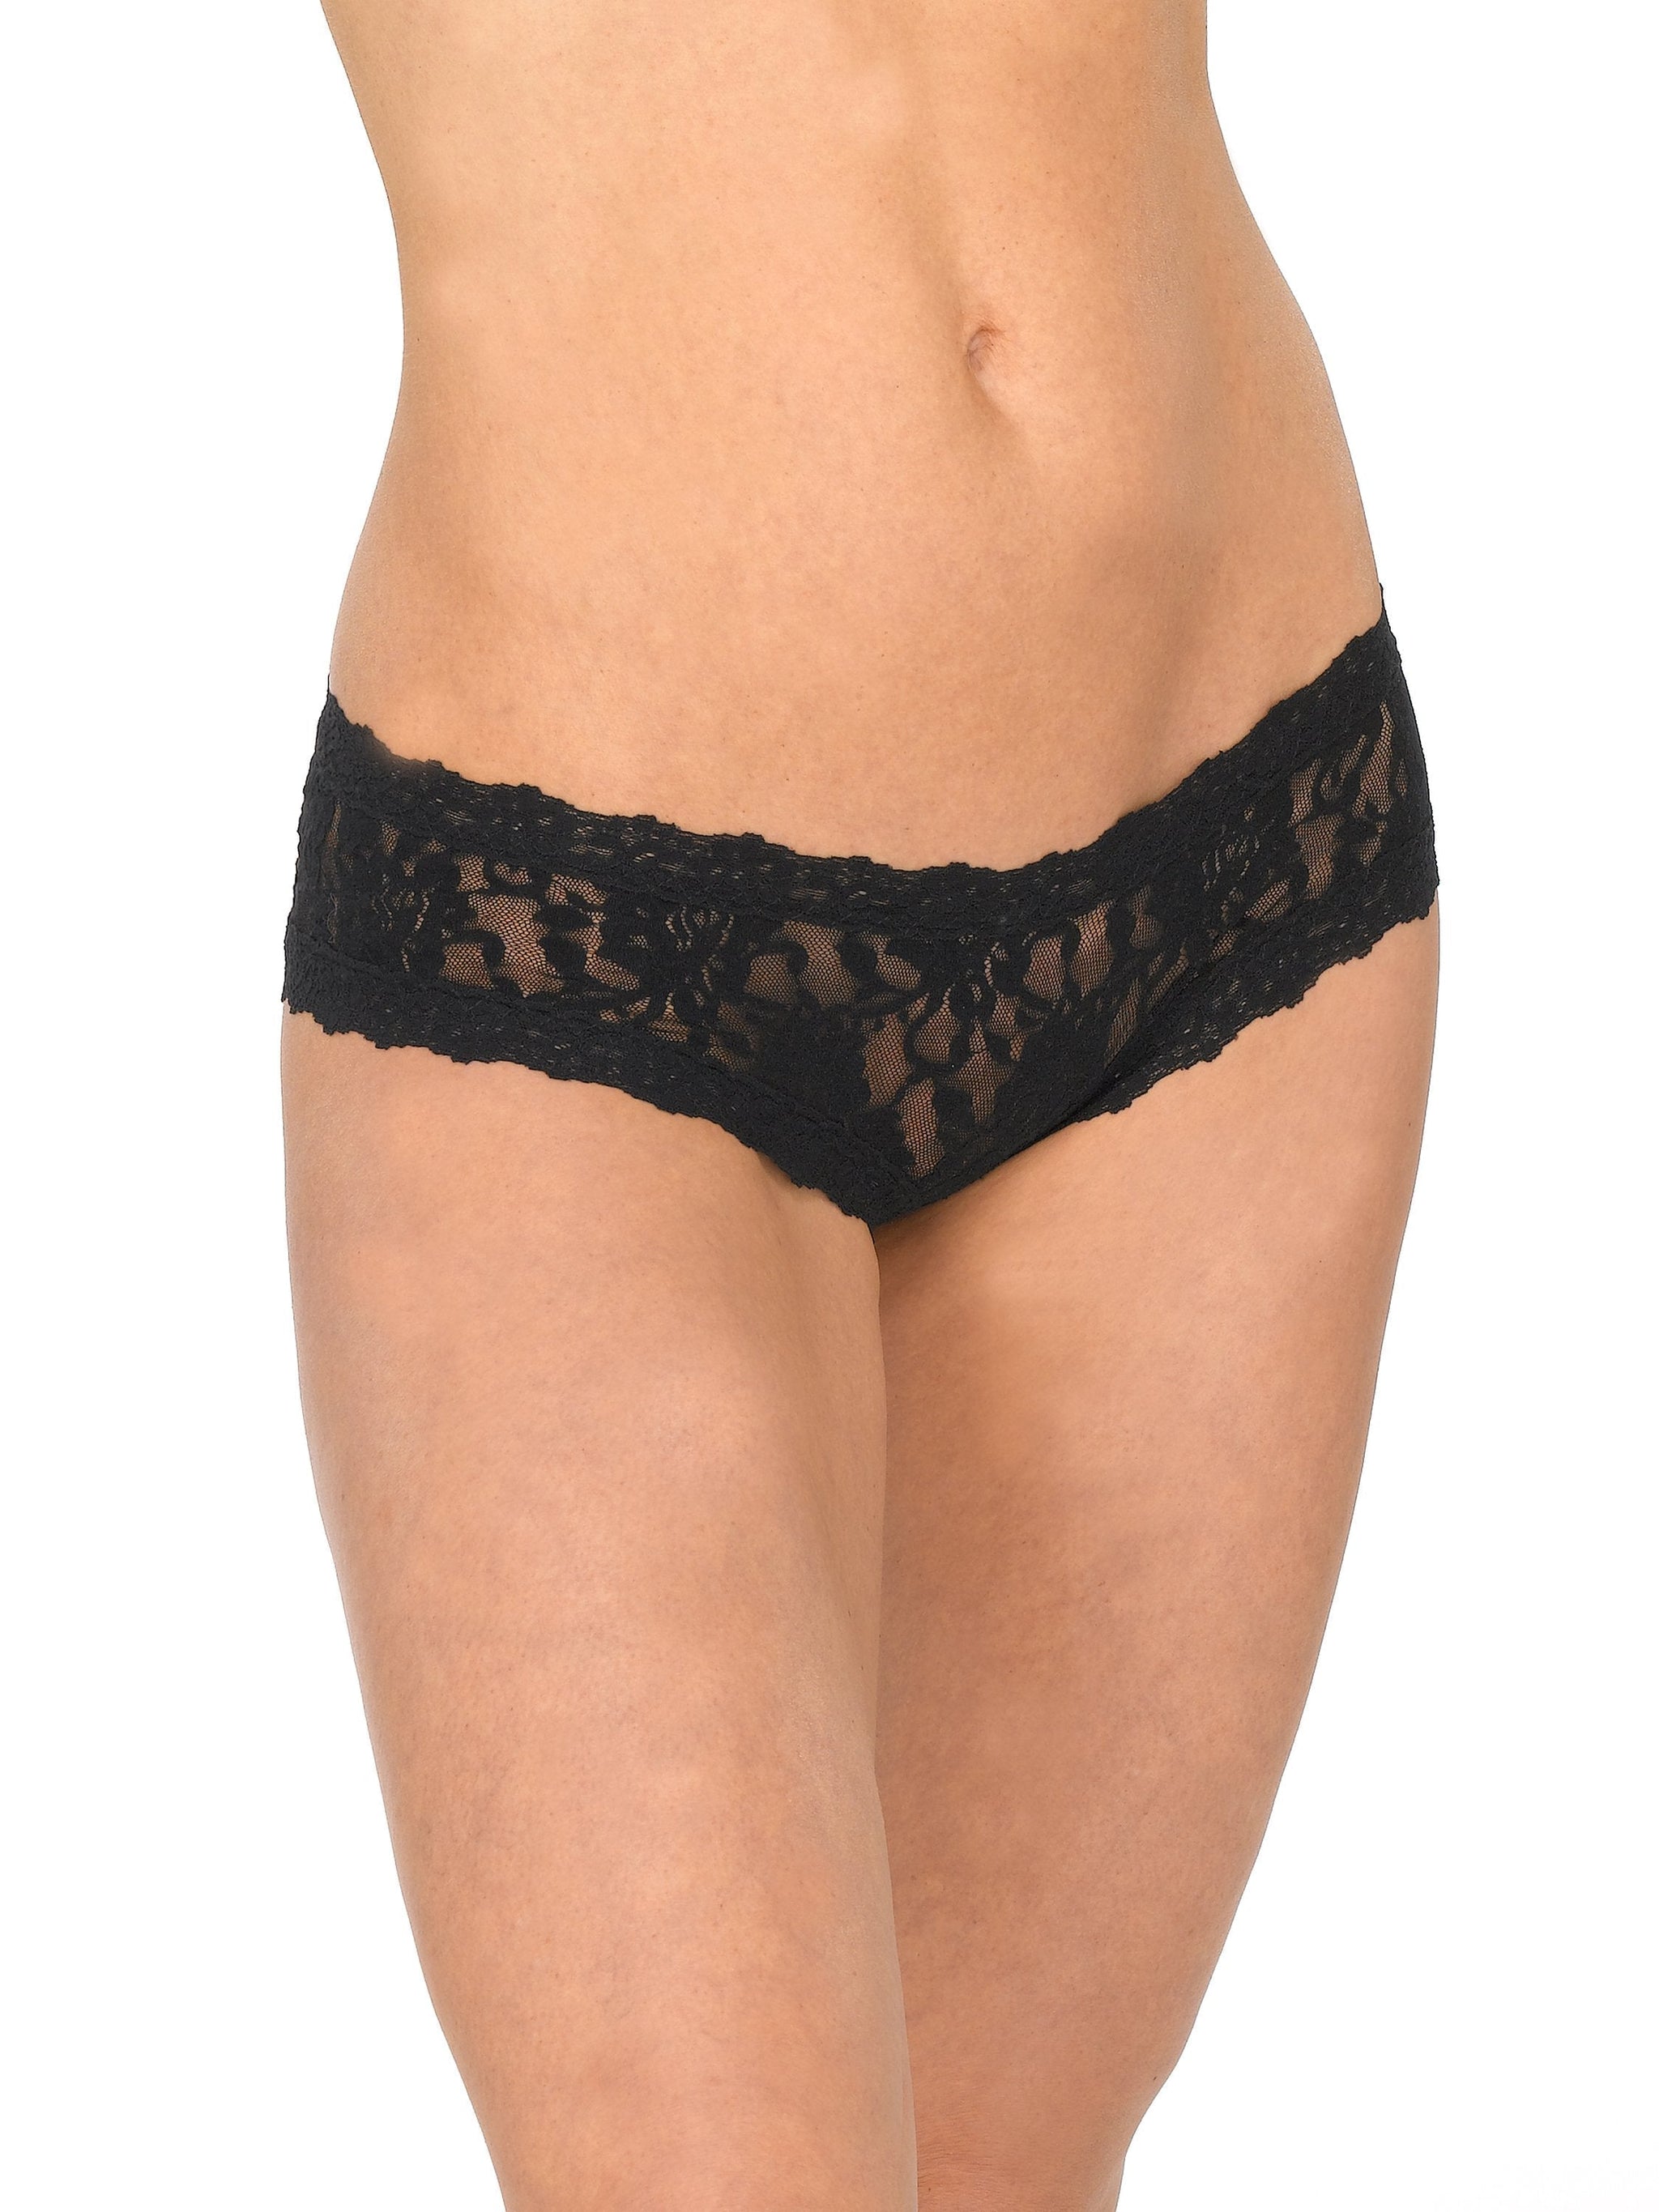  Womens Crotchless Briefs Invisible Seamless Hipster